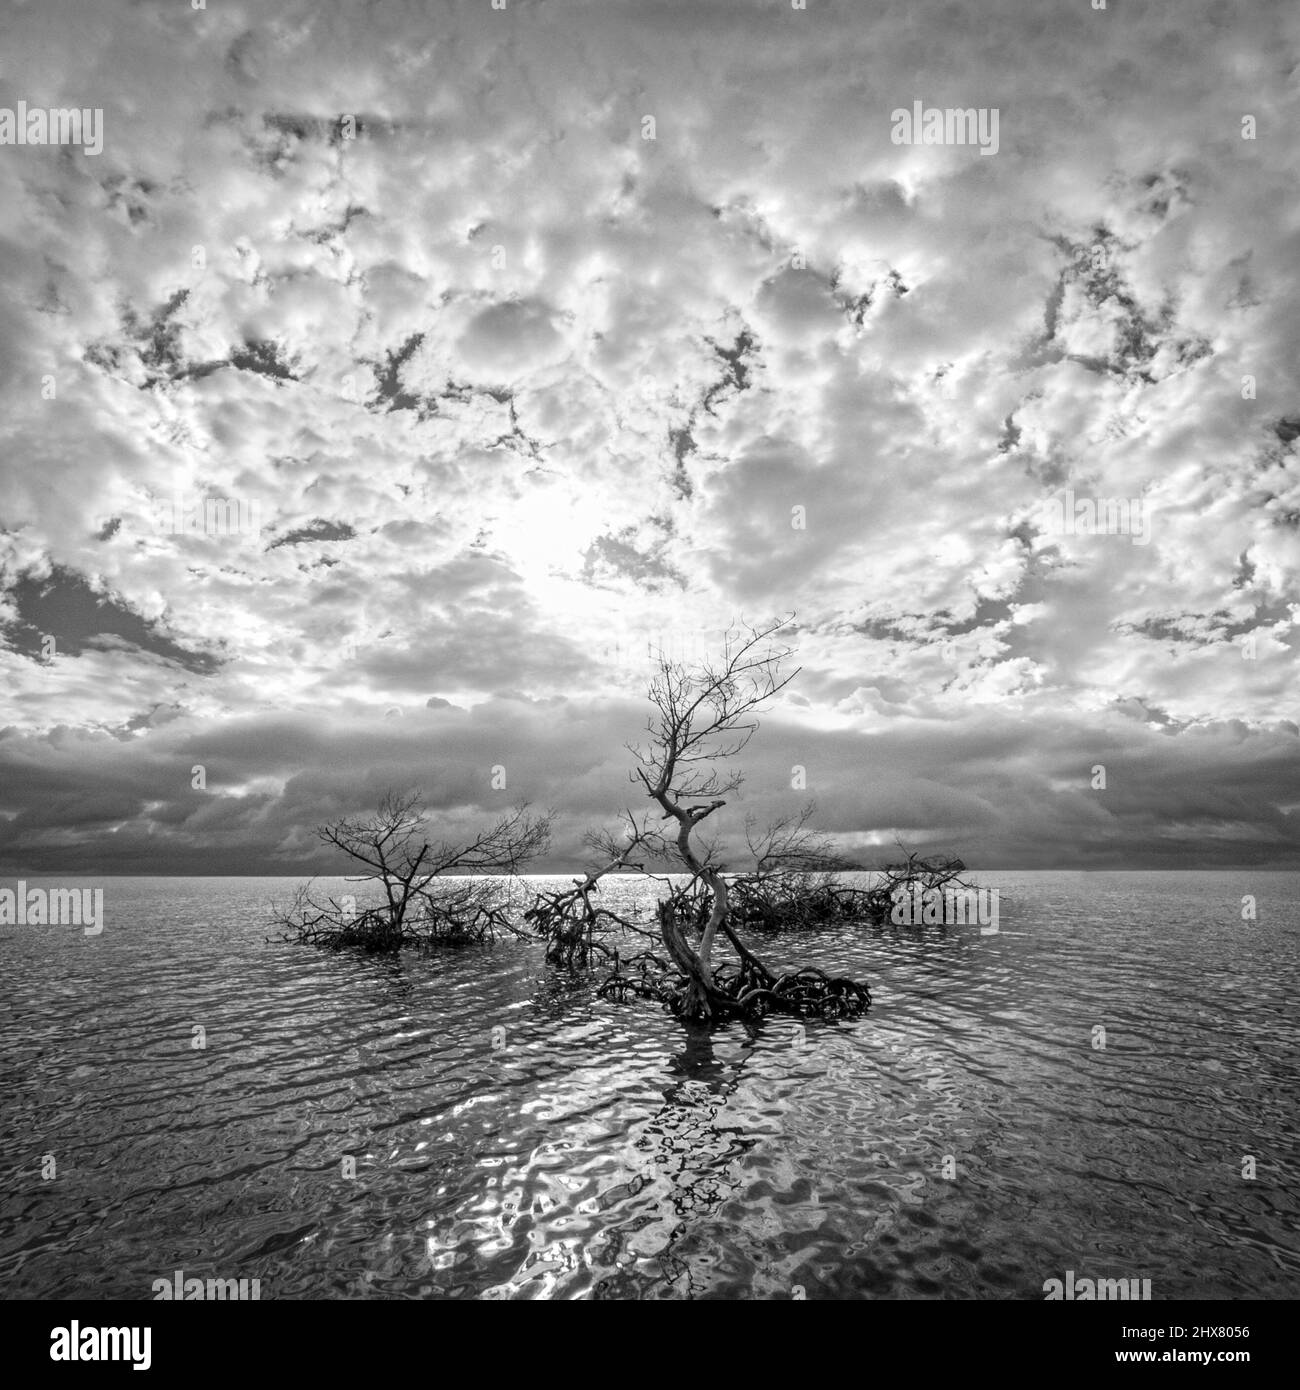 Dead mangroves due to hurricane damage Stock Photo